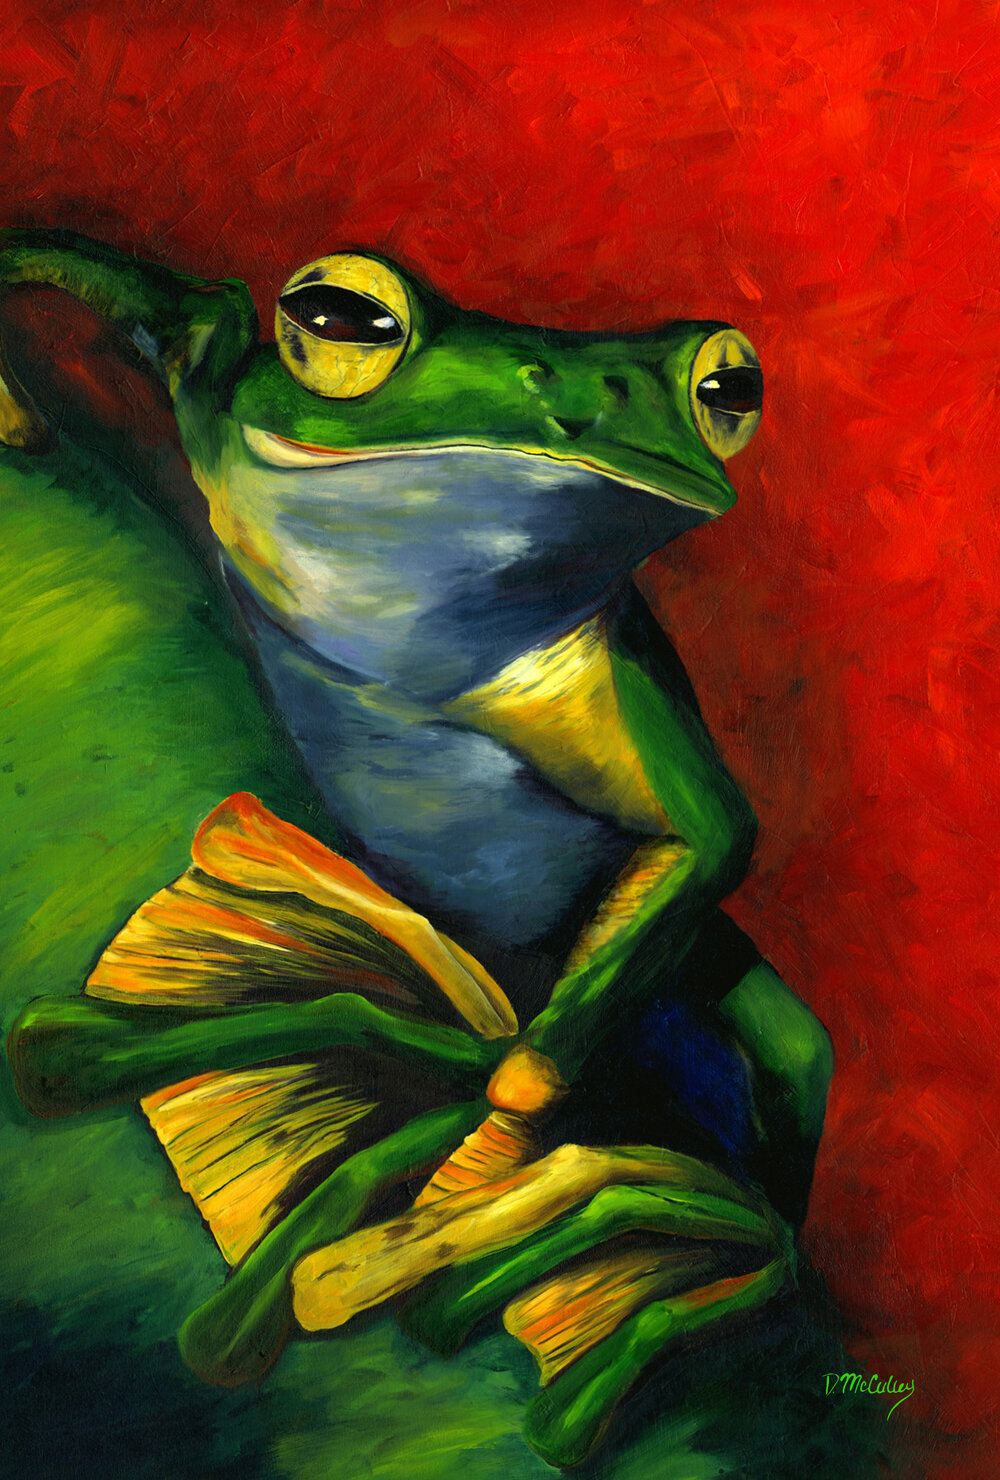 House Flag-28 x 40 Toland Home Garden 1010210 Tranquil Tree Frog 28 x 40 Inch Decorative